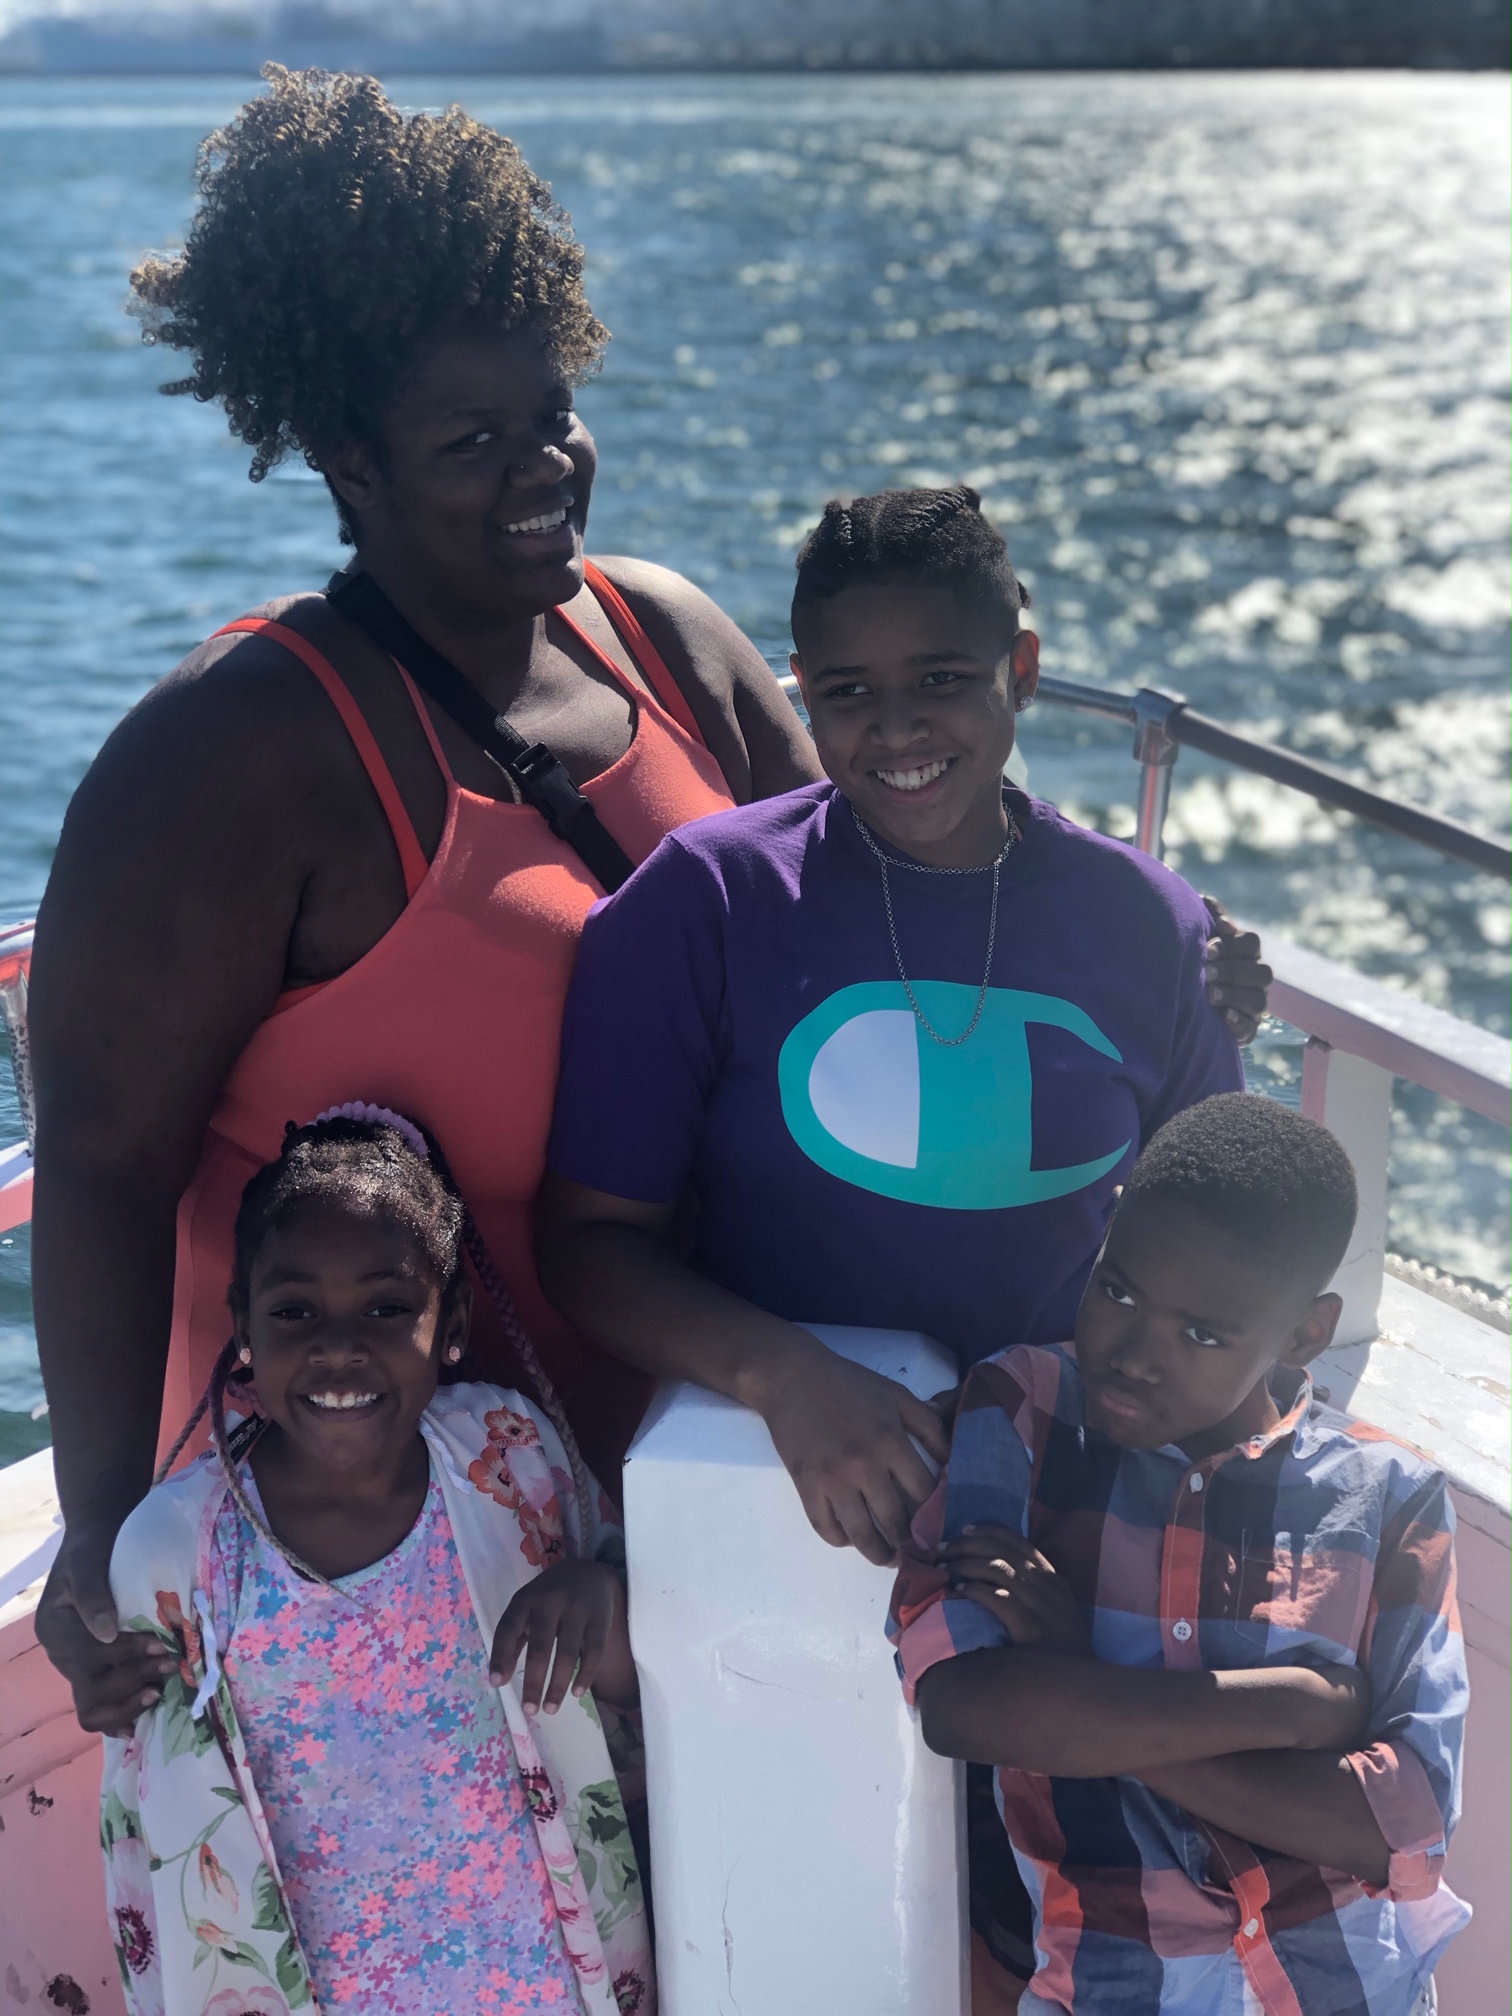 Mom-of-three and law student Sabrina poses with her children and a beautiful lake with sun streaks in the background